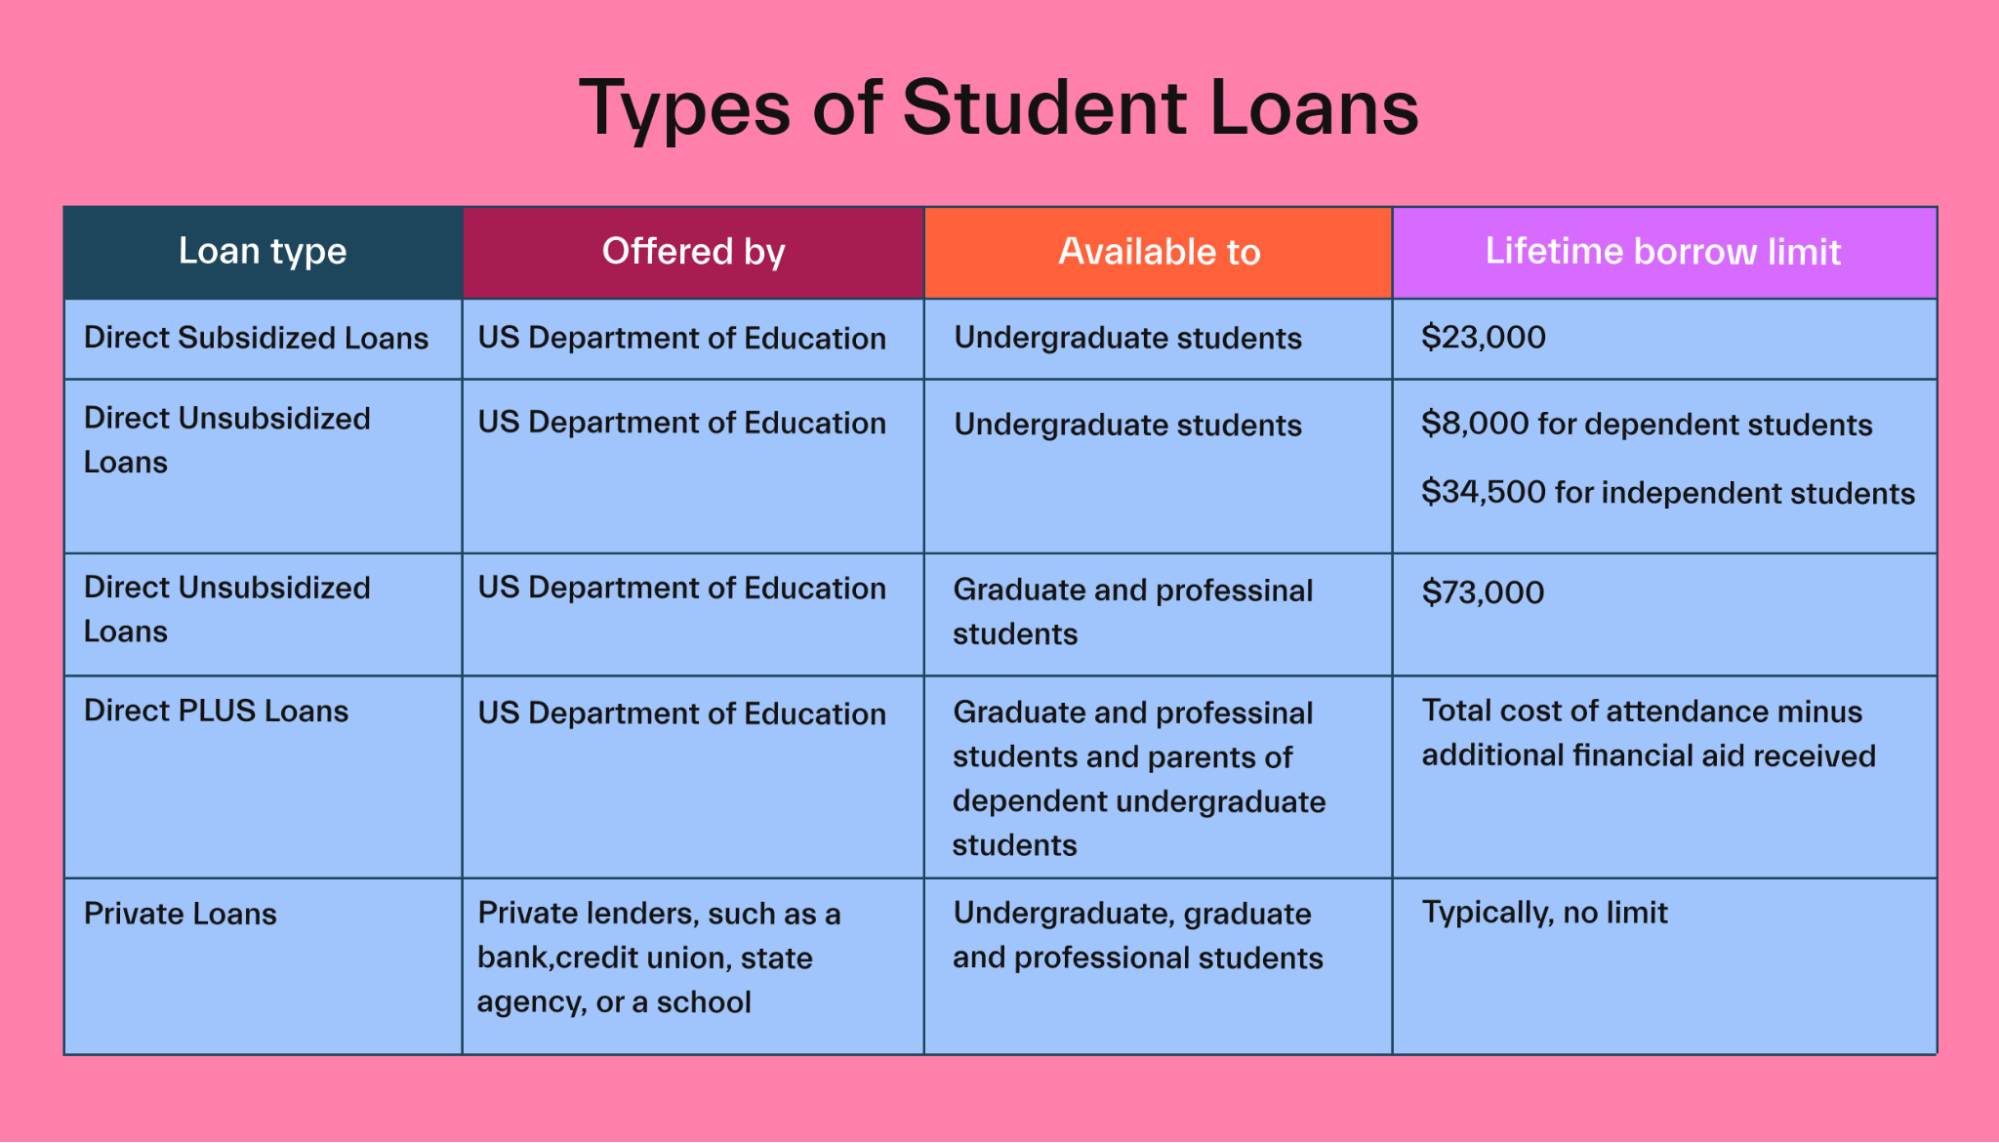 Types of student loans